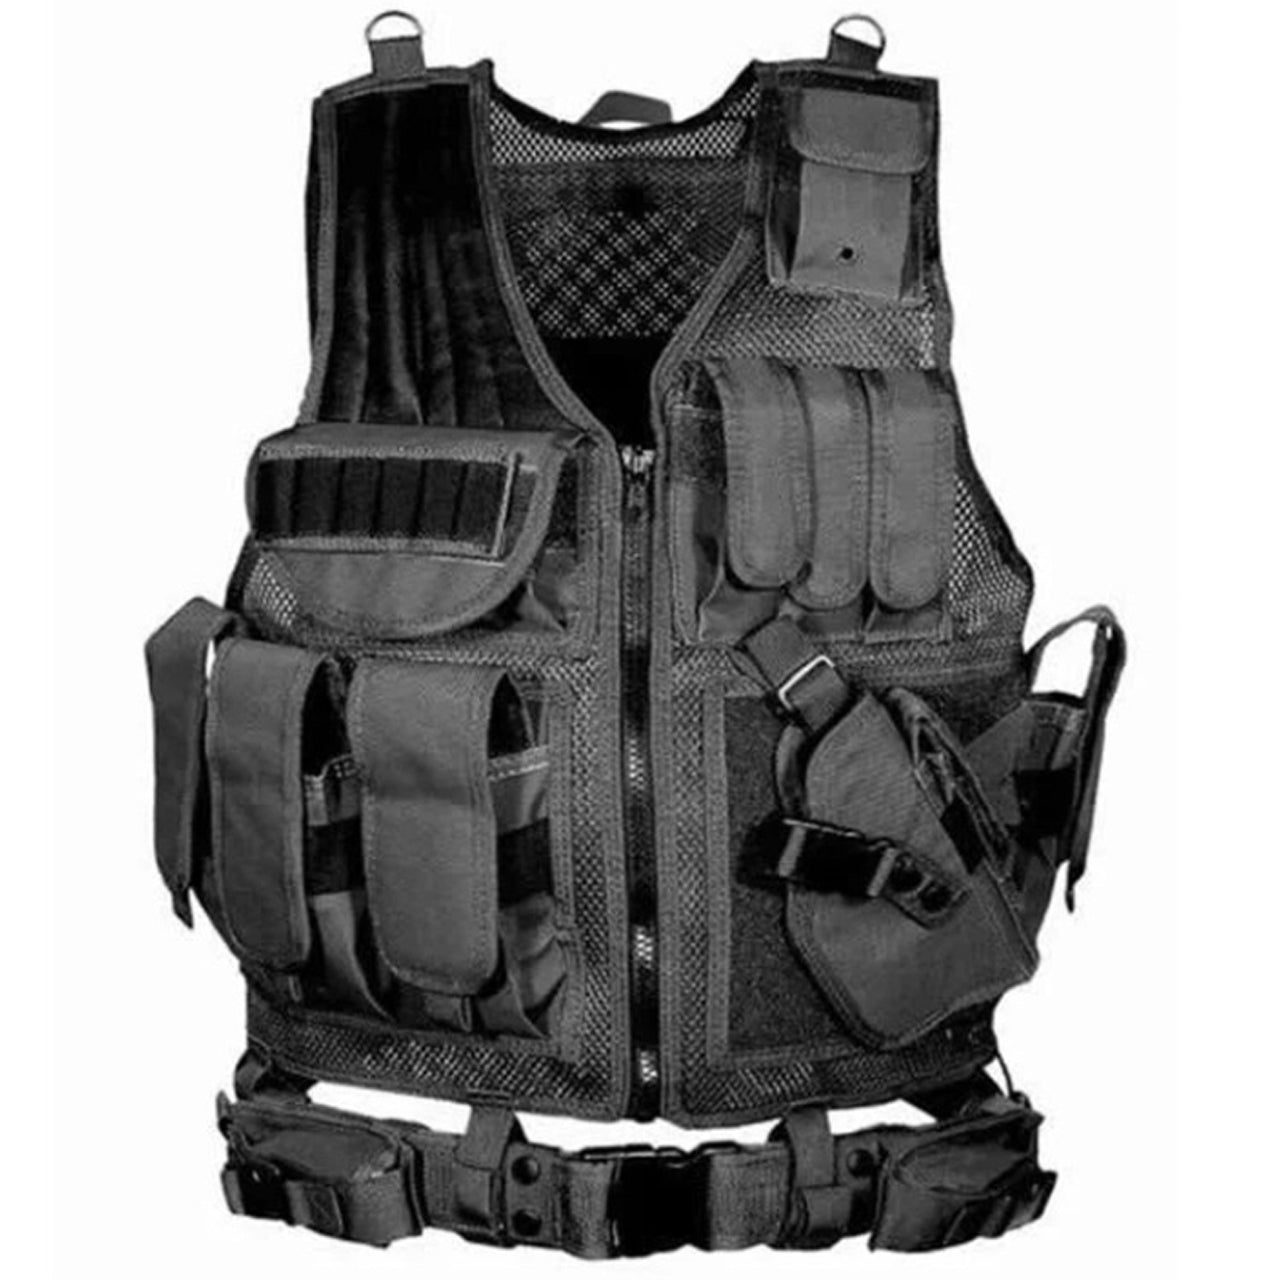 Crafted with high-density 600D polyester, strong zippers, and breathable mesh, this adjustable outdoor tactical vest is designed to be both comfortable and durable. www.moralepatches.com.au